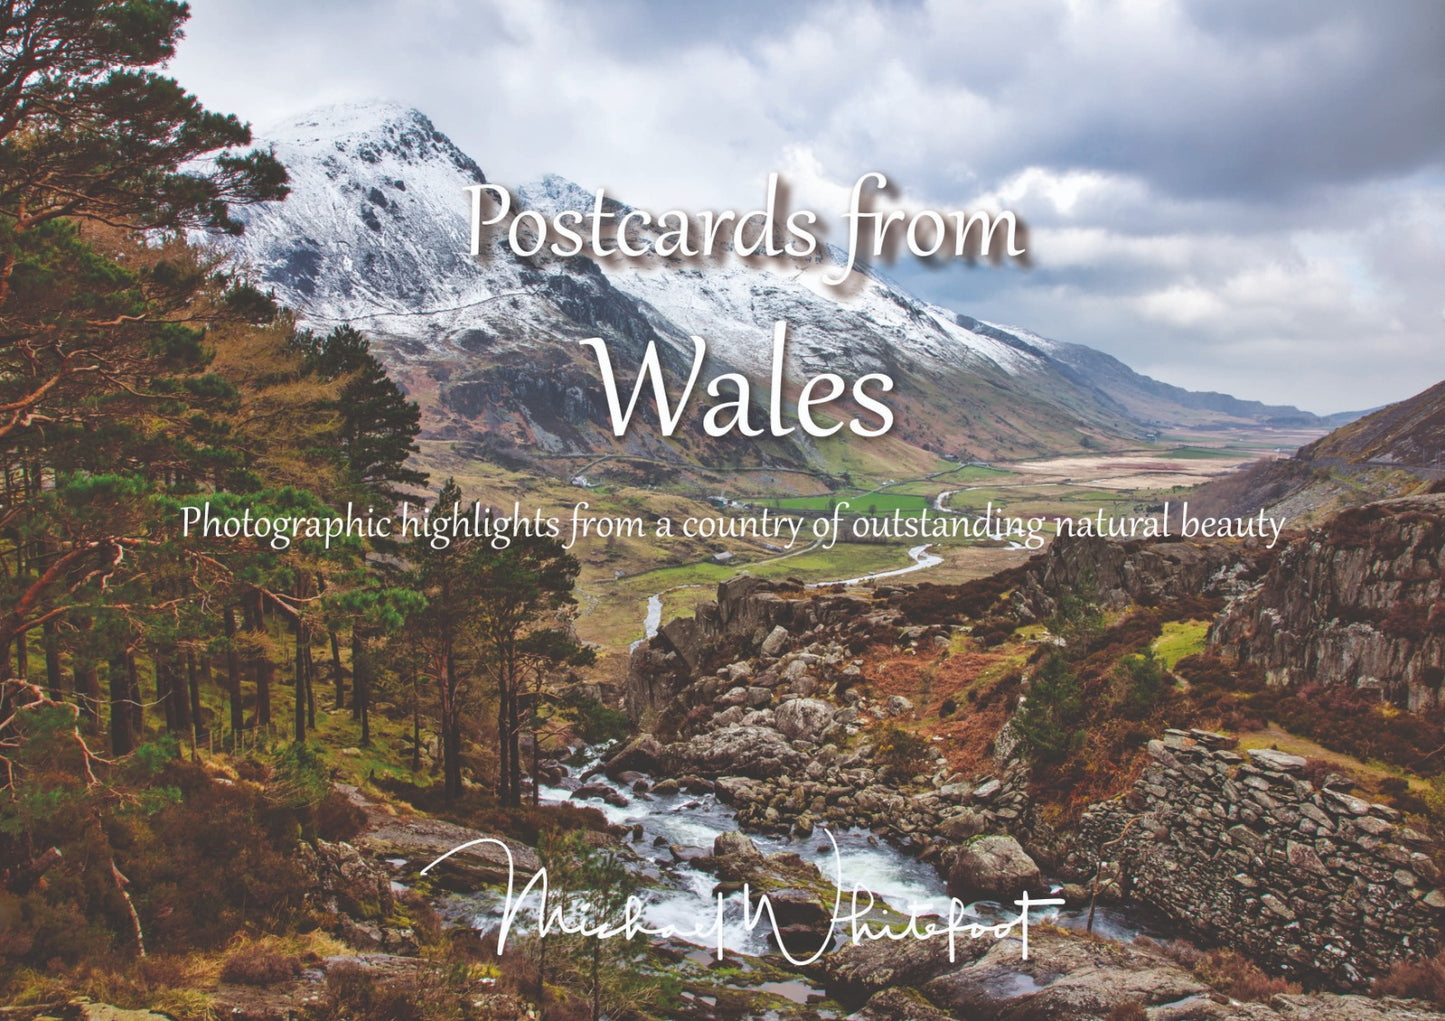 Postcards from Wales - Michael Whitefoot